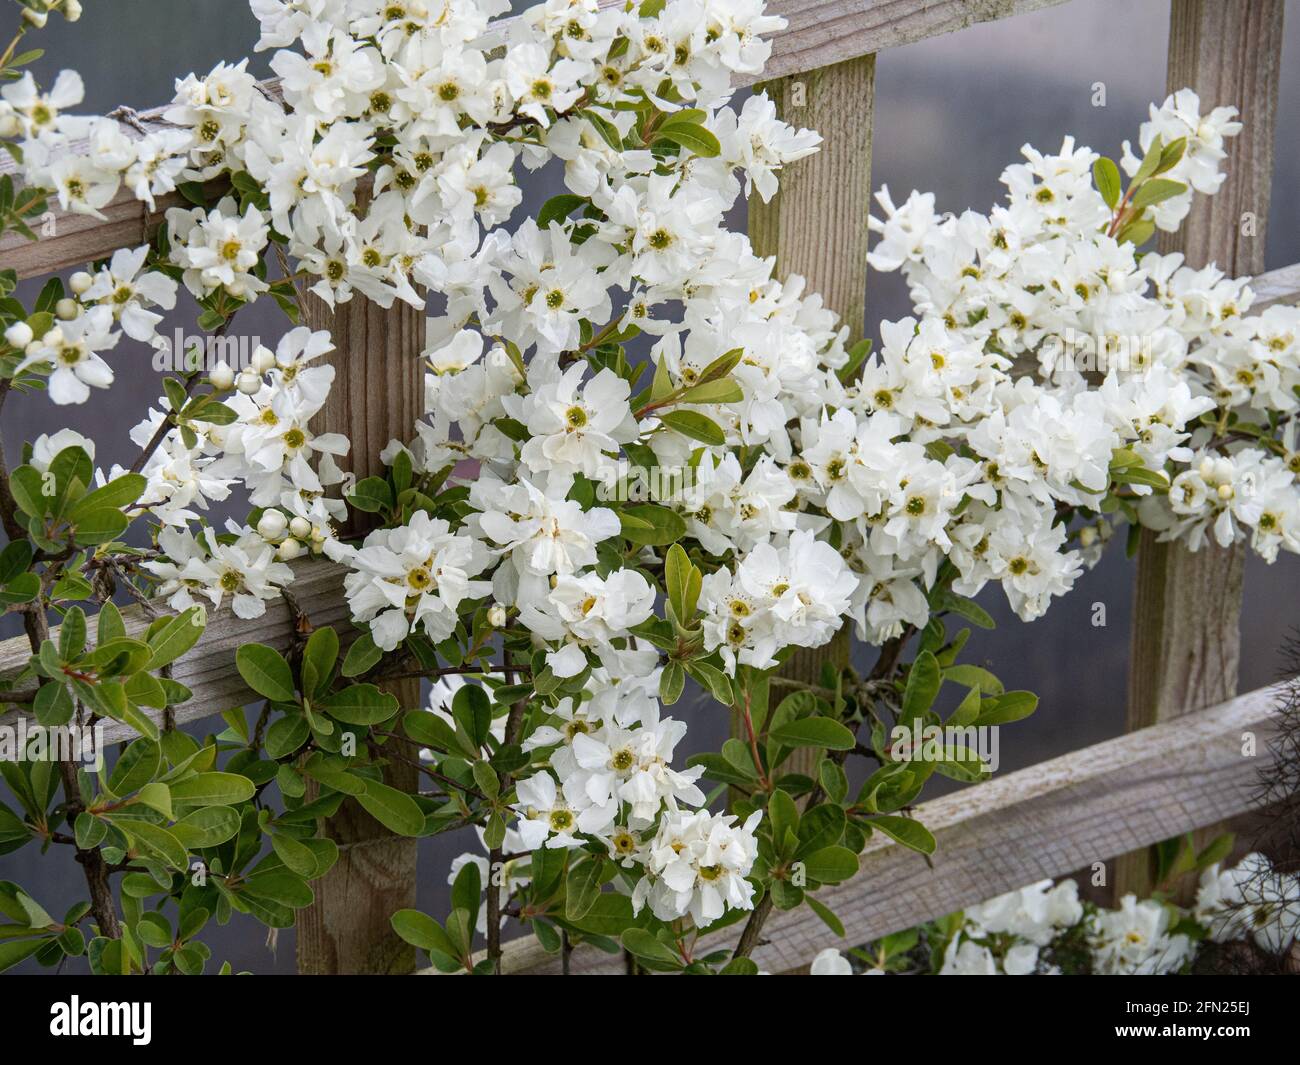 The clear white flowers of Exochorda grandiflora Niagara on a plant trained against a wooden trellis Stock Photo